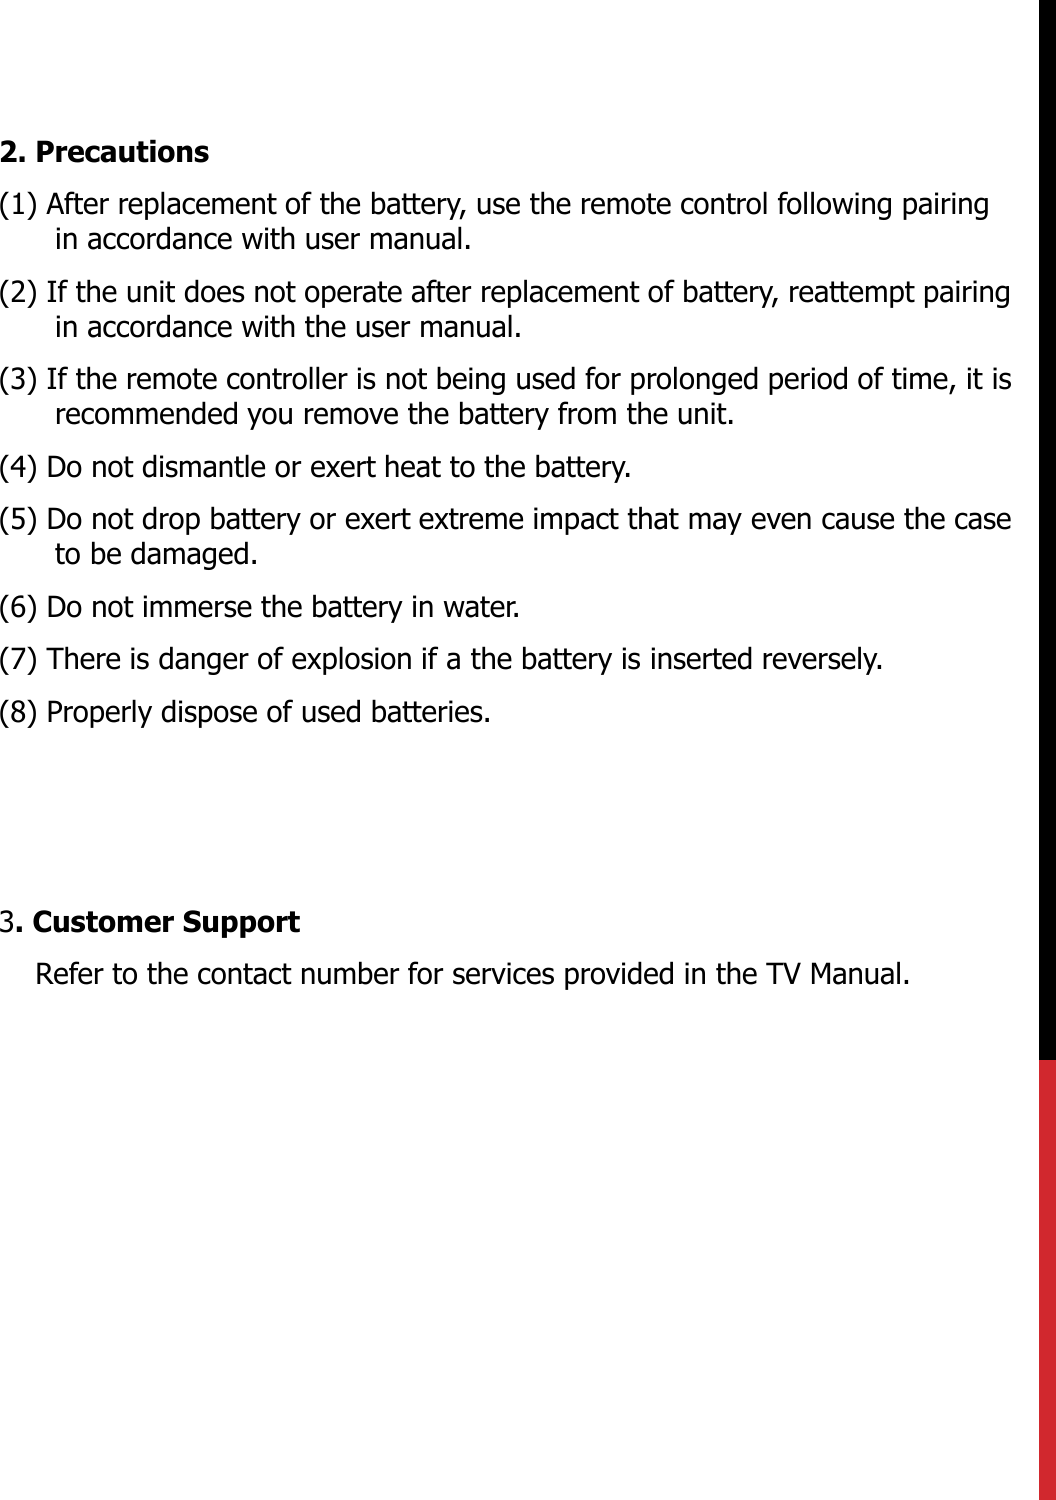 2. Precautions(1) After replacement of the battery, use the remote control following pairing in accordance with user manual.(2) If the unit does not operate after replacement of battery, reattempt pairing in accordance with the user manual.(3) If the remote controller is not being used for prolonged period of time, it is recommended you remove the battery from the unit.  (4) Do not dismantle or exert heat to the battery.(5) Do not drop battery or exert extreme impact that may even cause the case to be damaged. (6) Do not immerse the battery in water.(7) There is danger of explosion if a the battery is inserted reversely.(8) Properly dispose of used batteries.3. Customer SupportRefer to the contact number for services provided in the TV Manual.   